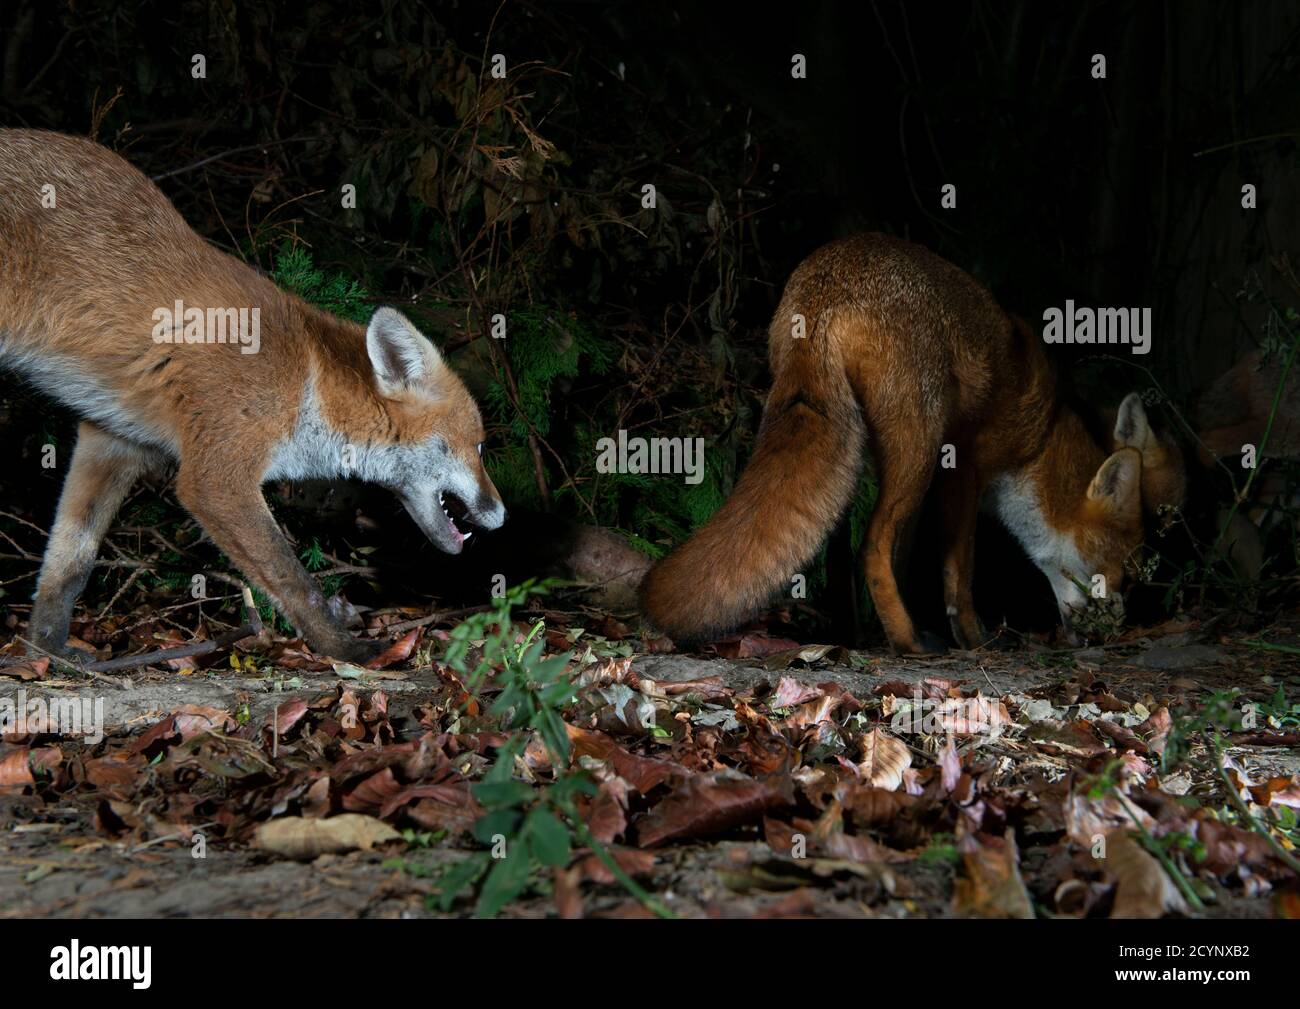 Three foxes at night the one behind challenging one in front of it which is foraging and the third is behind  the foraging one Stock Photo